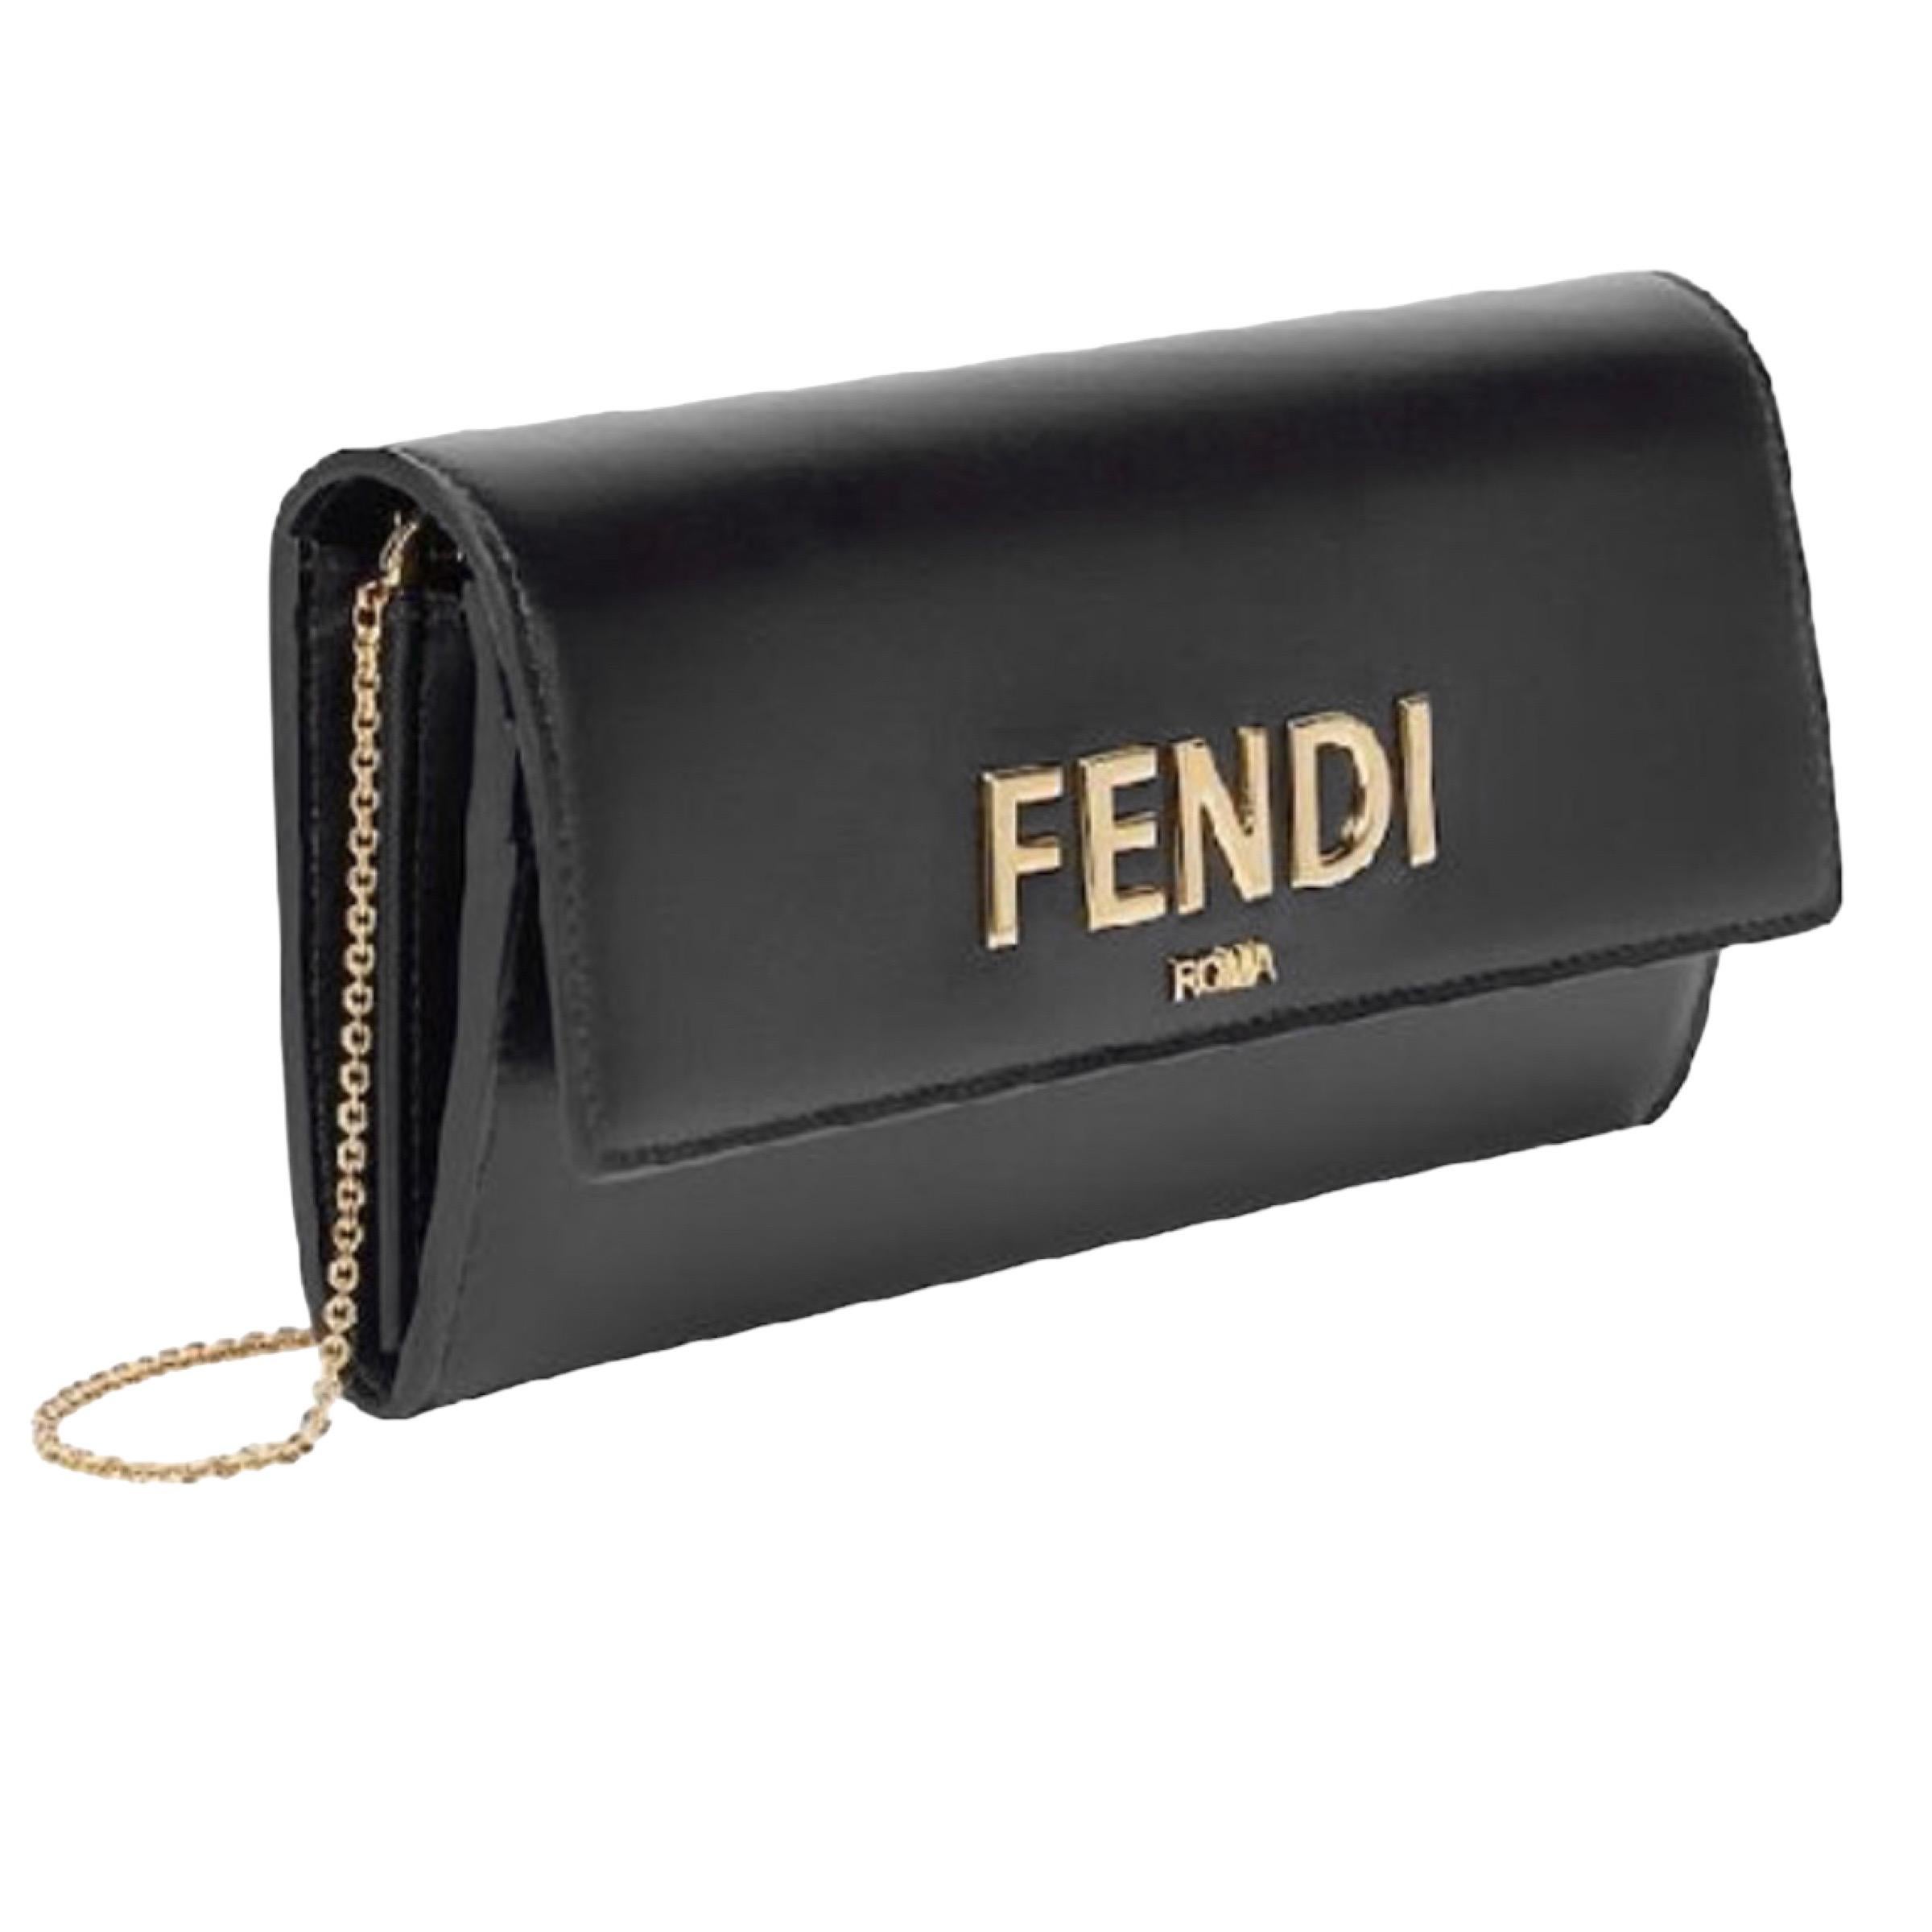 New Fendi Black Roma Leather Continental Wallet Clutch Crossbody Bag

Authenticity Guaranteed

DETAILS
Brand: Fendi
Condition: Brand new
Gender: Women
Category: Clutch
Color: Black
Material: Leather
Front logo plaque
Gold-tone hardware
Removable